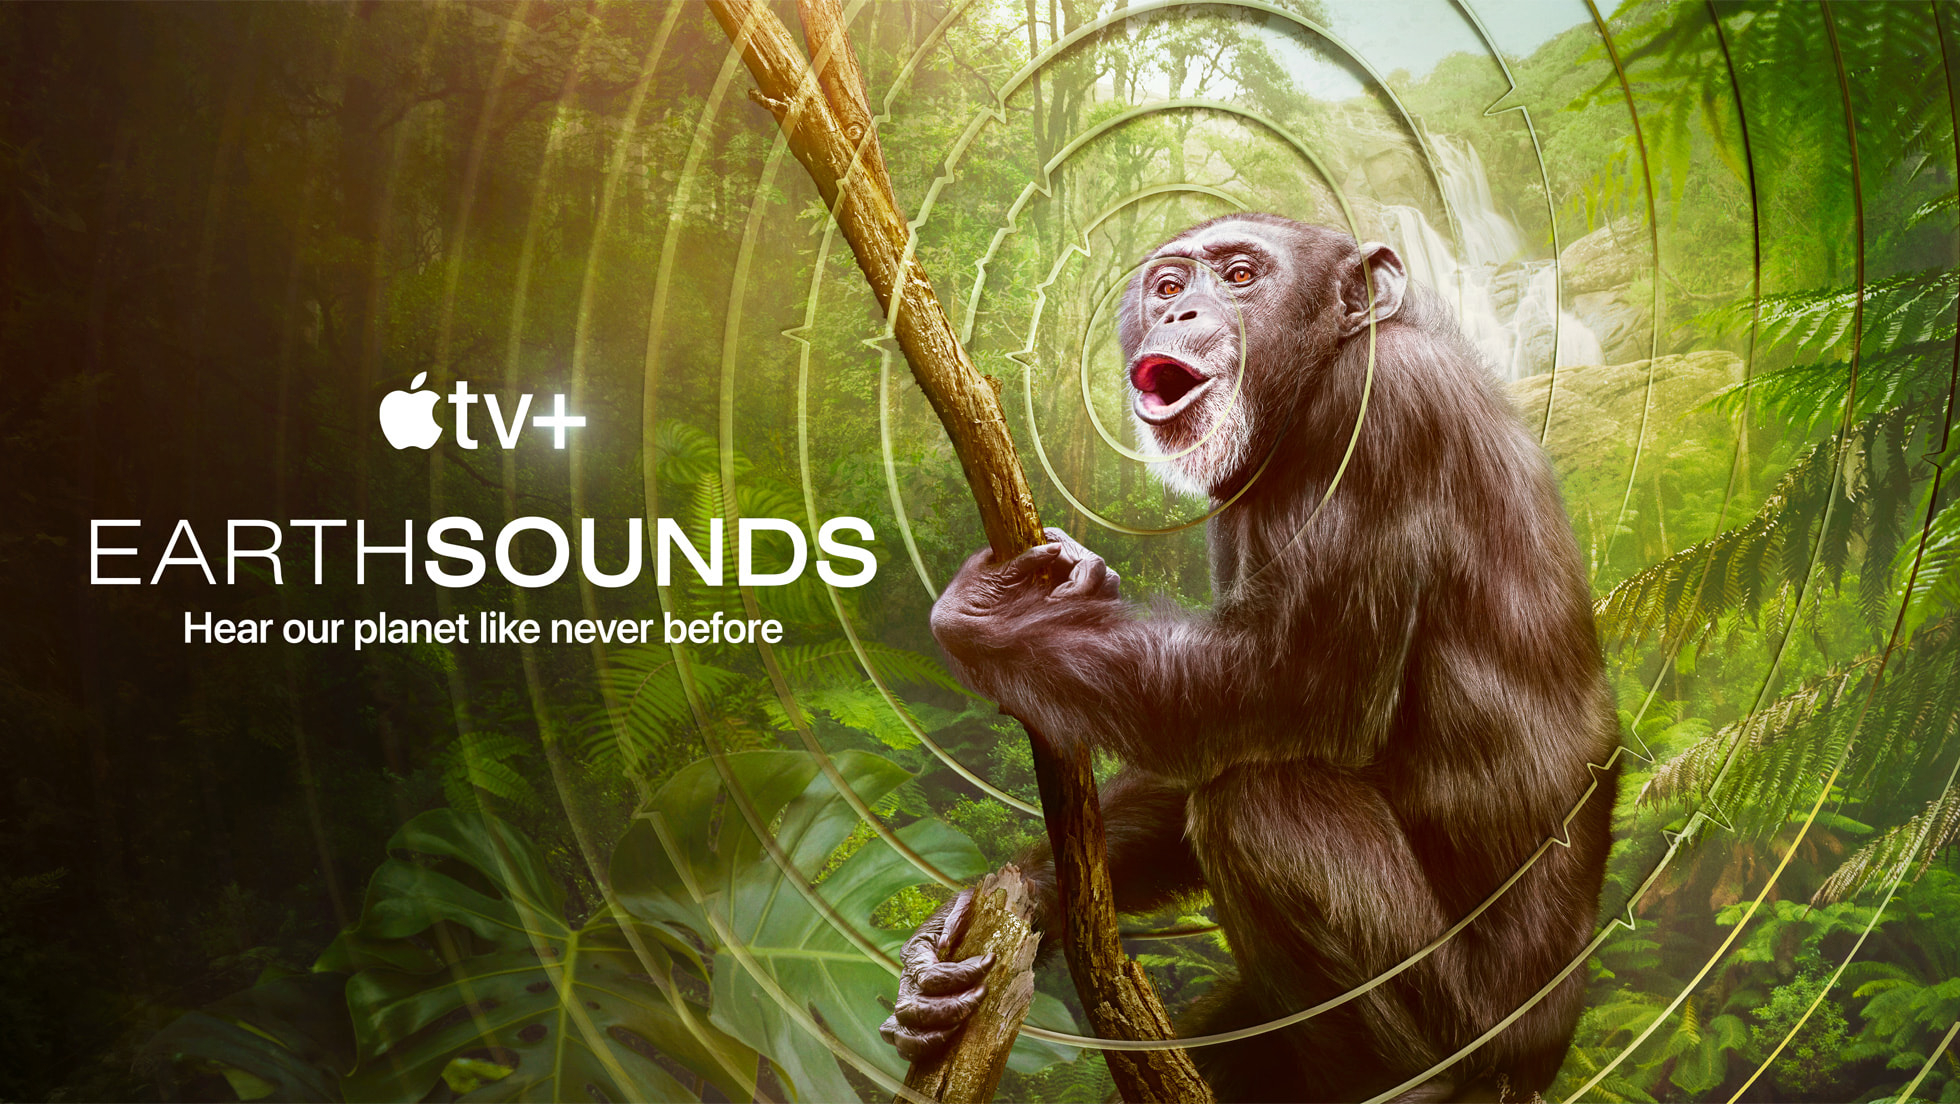 Apple TV Plus' new documentary might be the most ambitious nature program ever — Tom Hiddleston and Earthsounds premieres February 23